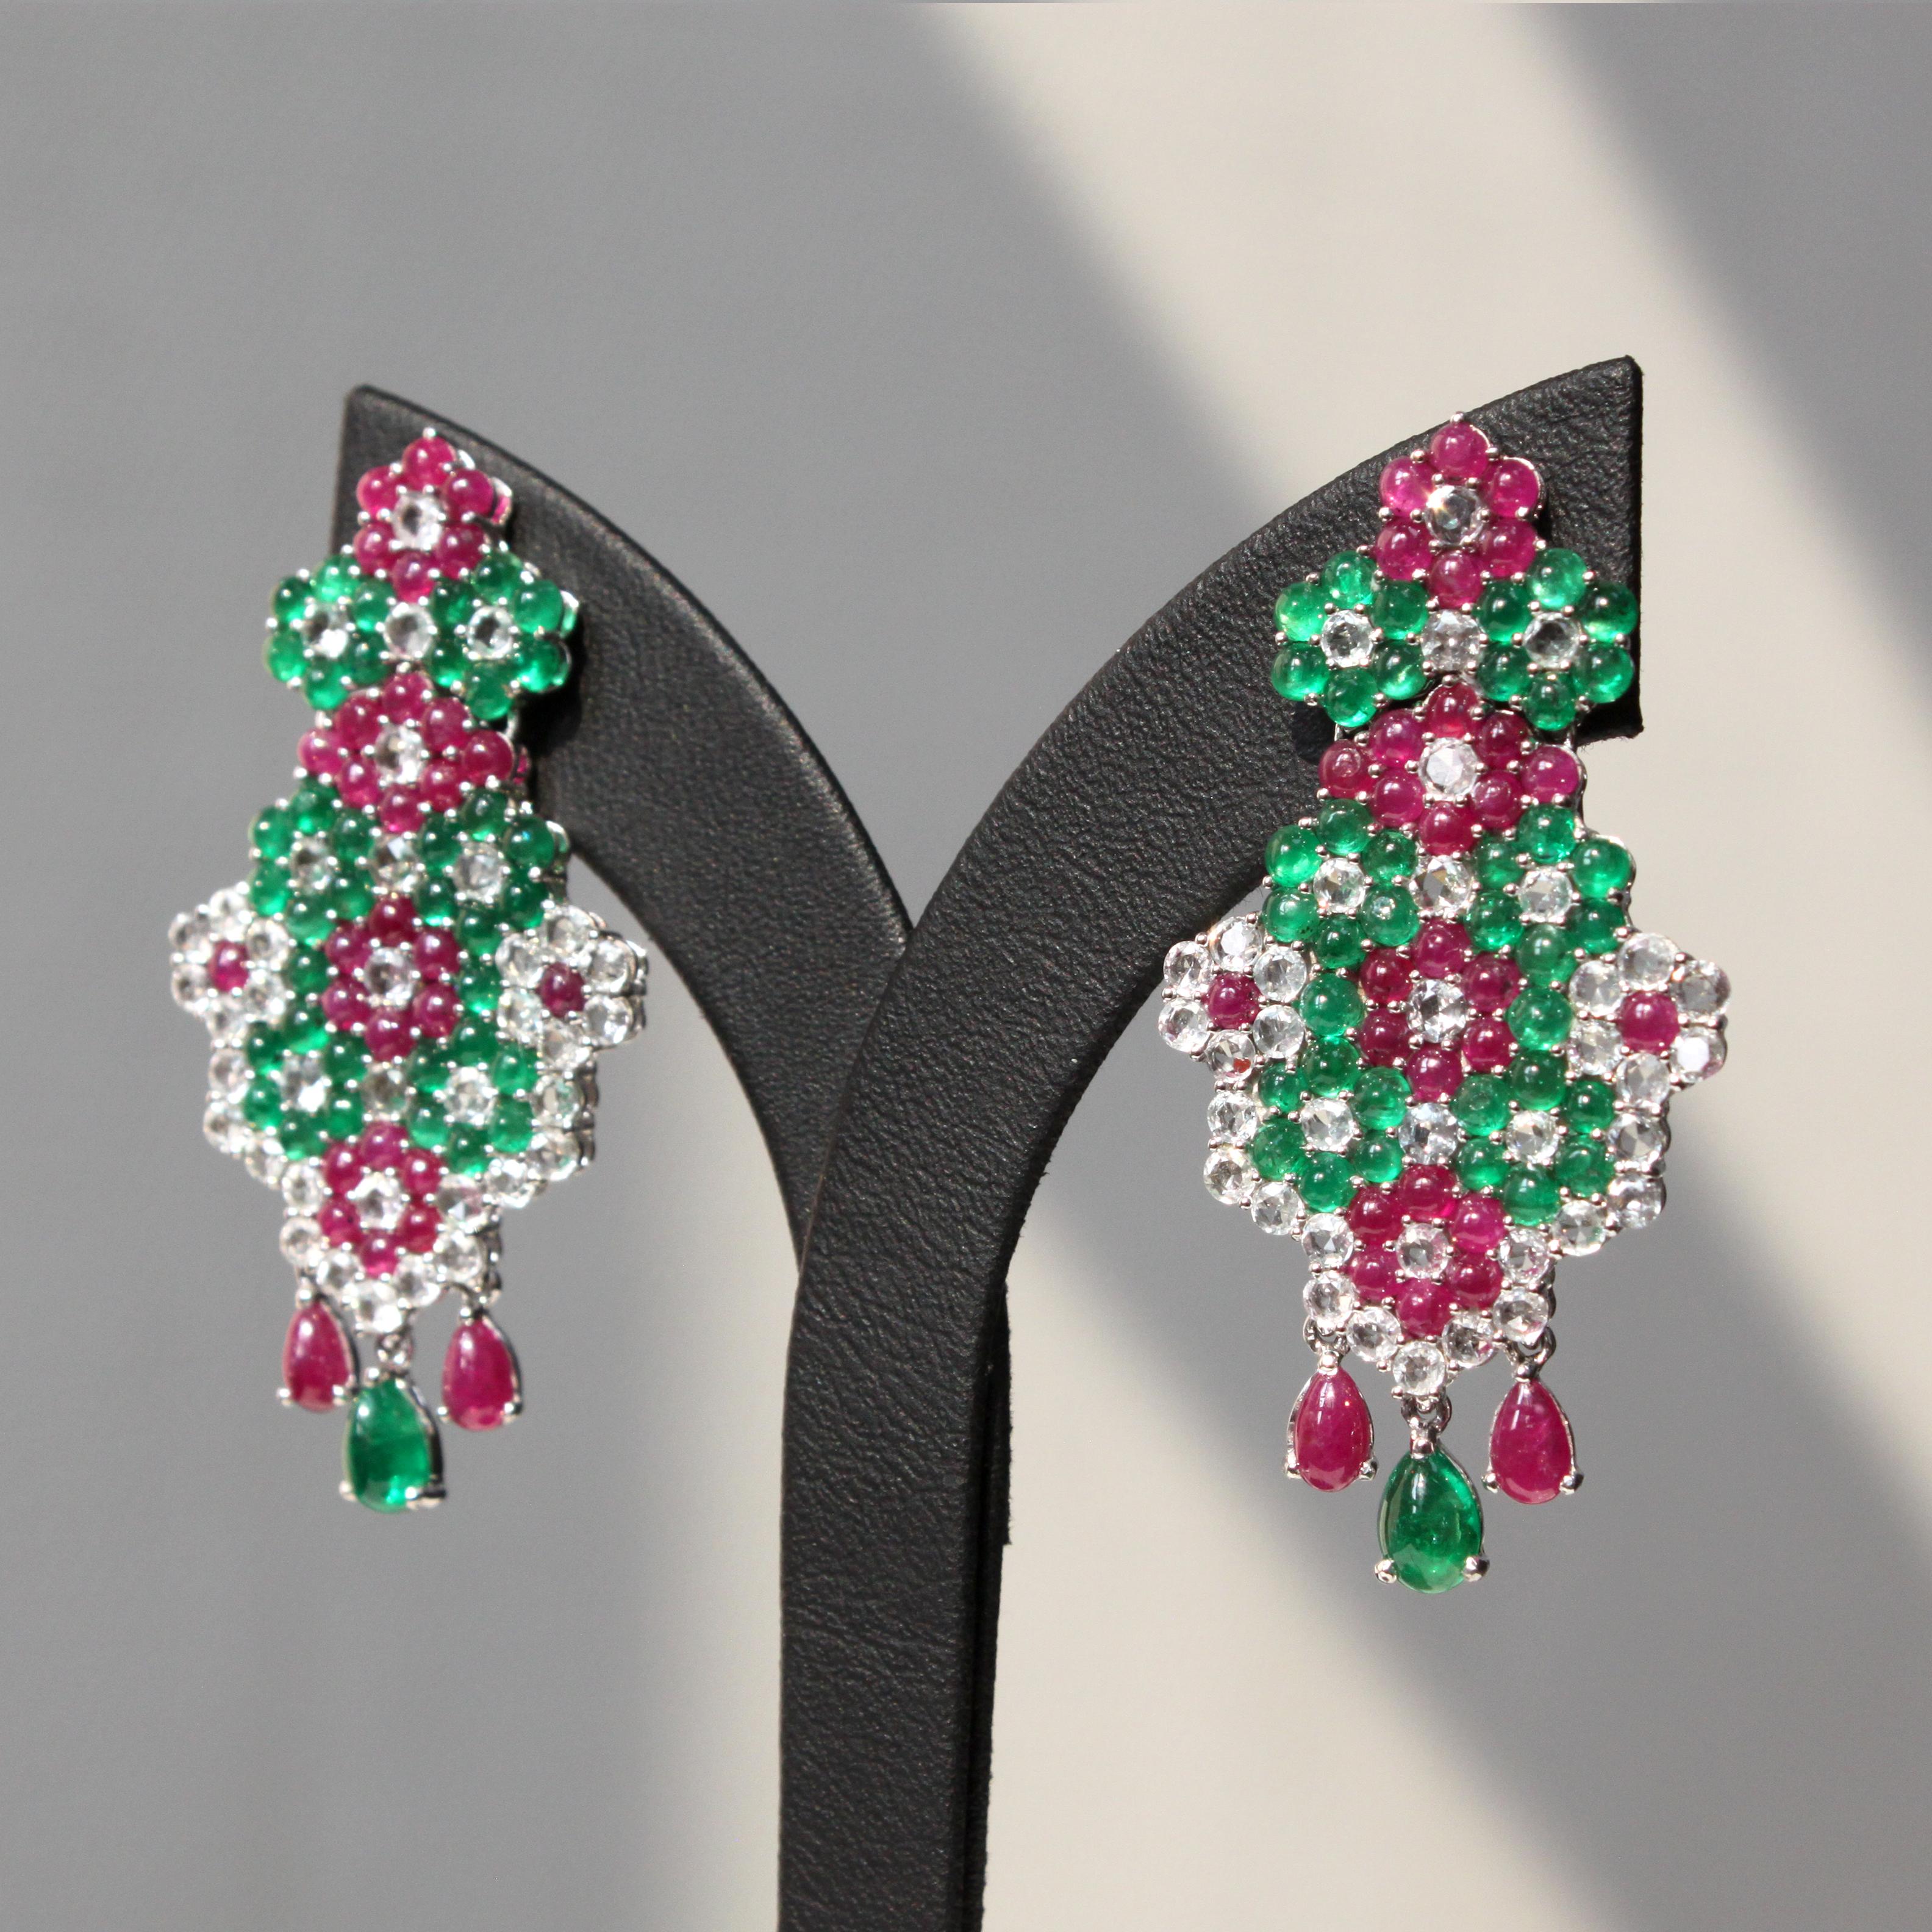 Cabochon 14K white gold earrings adorned with emeralds, rubies, and white sapphires For Sale